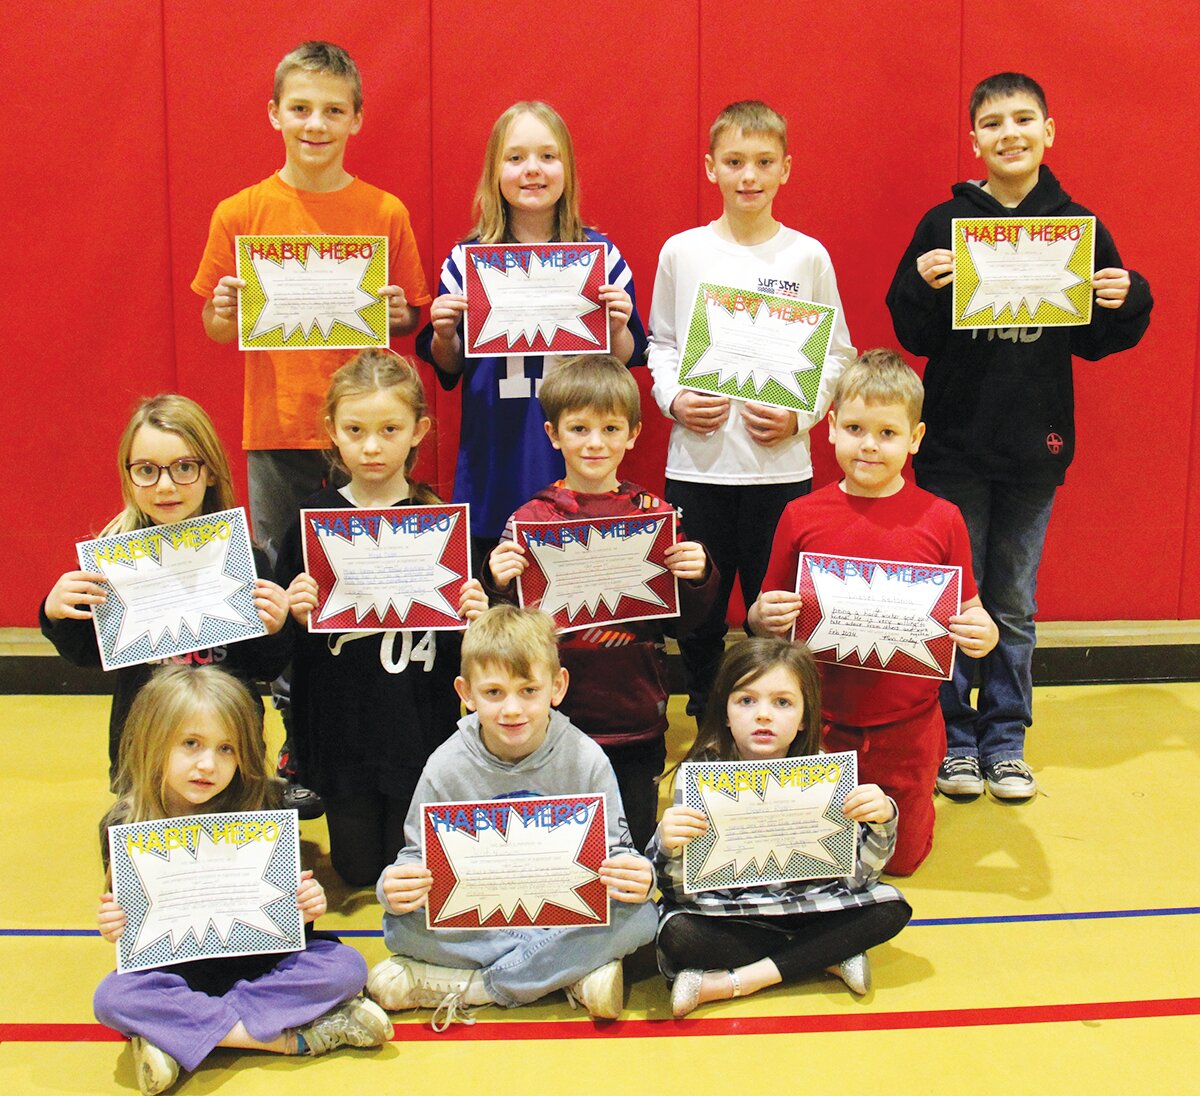 As a part of their Leader in Me program, Turkey Run Elementary students received Habit Hero Awards. Habit Hero awards are given to students who set an example by being a good leader and demonstrate one of the seven habits.  Awards are presented by staff members to students who they believe have excelled in one of the habits. Earning Habit Hero awards for January were front row, Anasatia Morman, Jacob Newnum and Sophie Ryan; middle row, Evie Mundell, Miya Doan, Luke Davies and Diesel Reitsma; and back row, Nixon Newnum, Savanna York, Caleb Mauntel and Ezekiel Diaz. Not pictured are Rayn Vandevender, Griffin Woods, Alaiya Steele and Braxton Jeffrey.